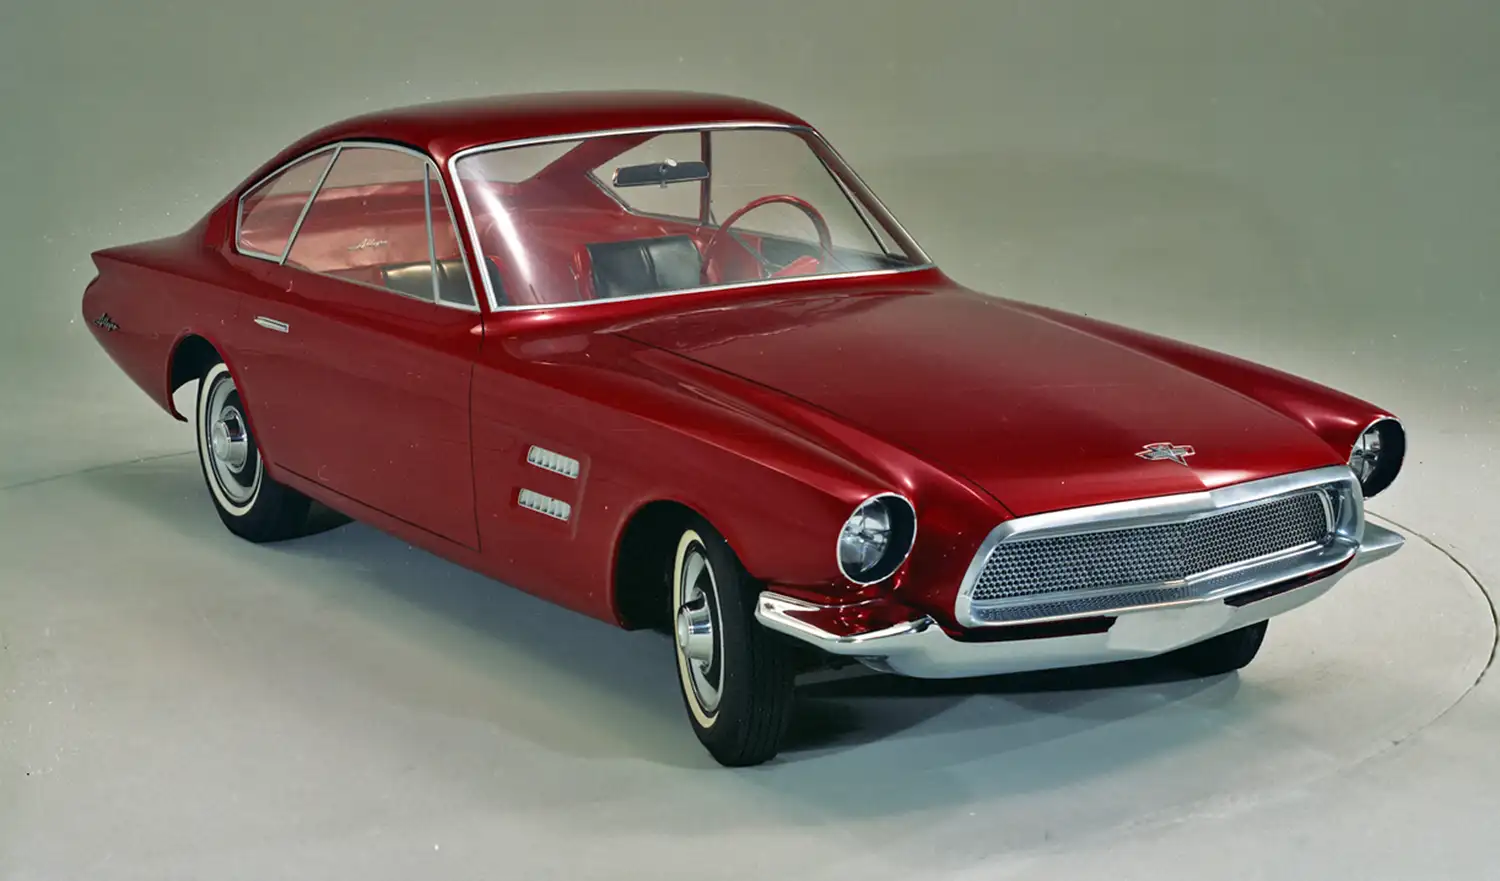 1963 Ford Allegro Concept: Paving the Way for the Mustang